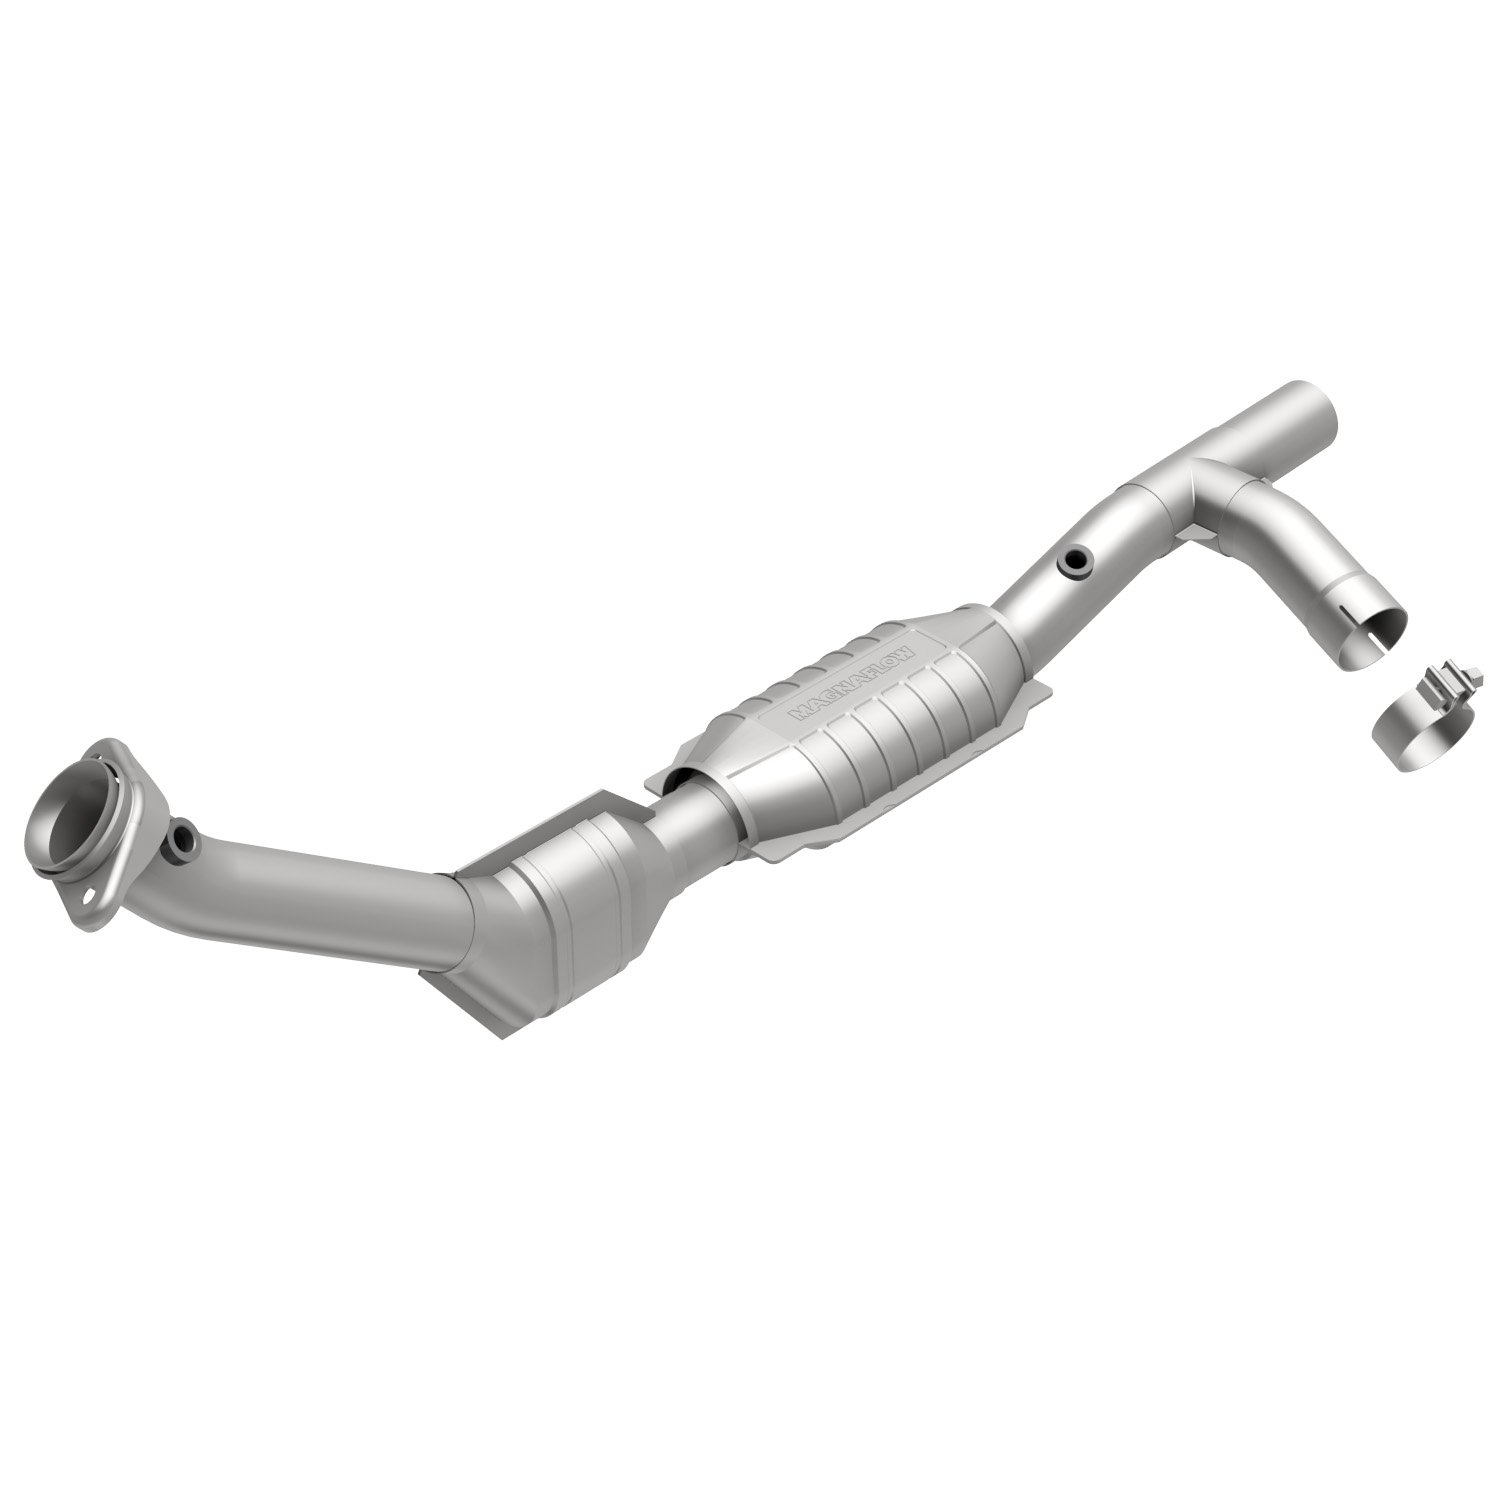 2000 Ford expedition catalytic converter problems #8